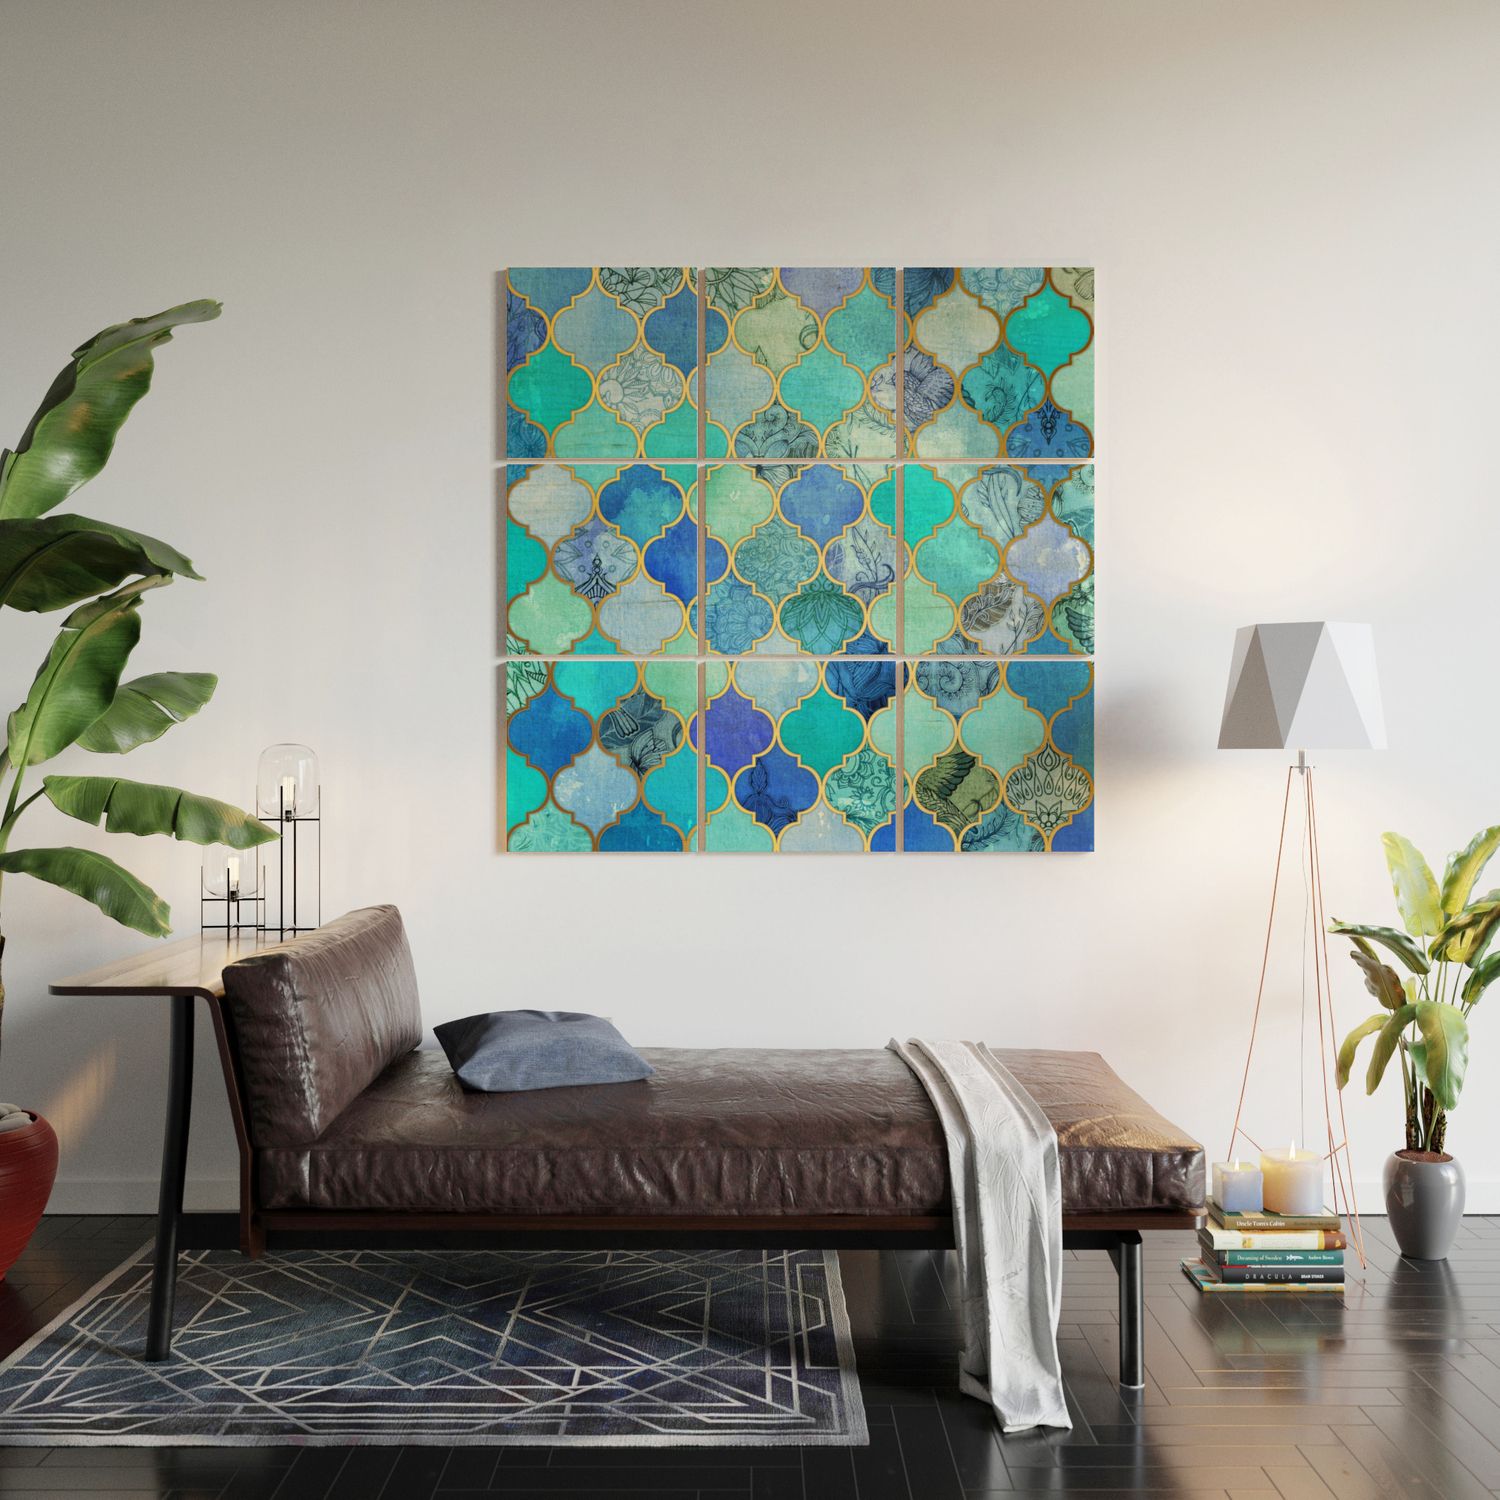 Cobalt Blue, Aqua & Gold Decorative Moroccan Tile Pattern Wood Wall Art Micklyn | Society6 Intended For Latest Gold And Teal Wood Wall Art (View 18 of 20)